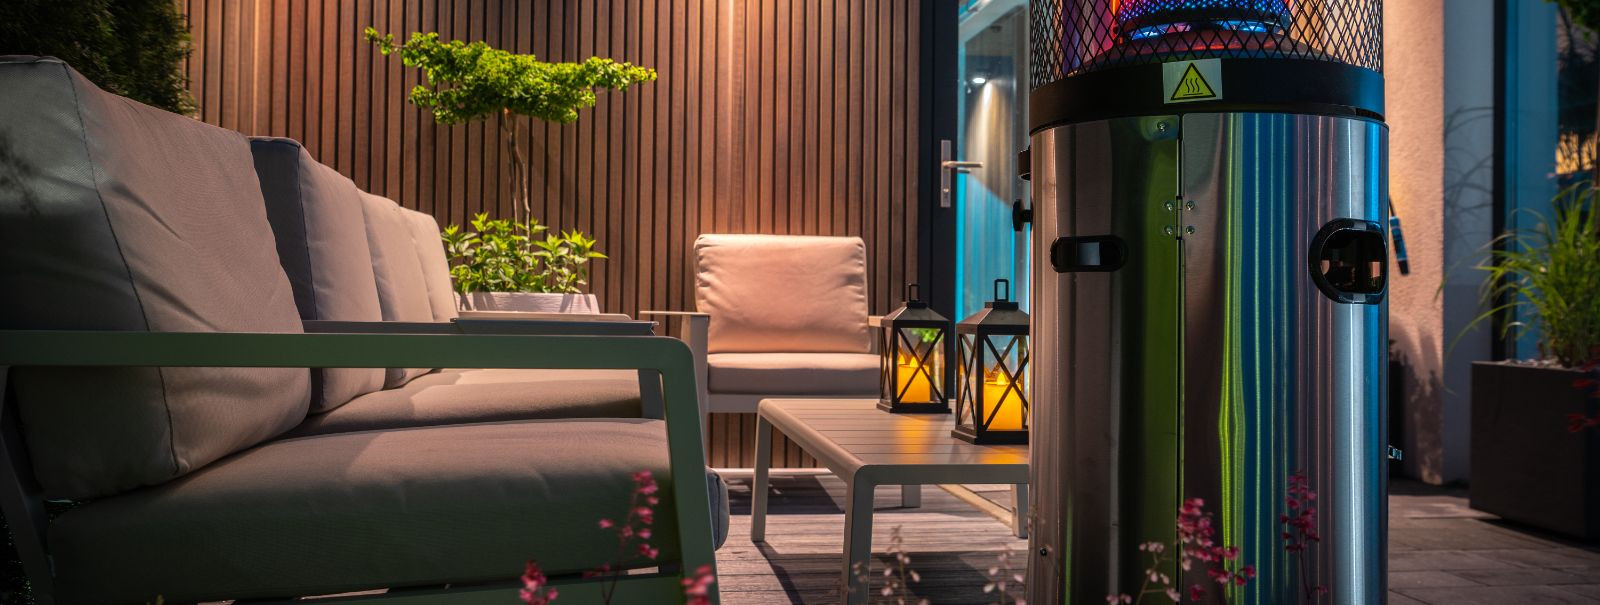 A terrace can significantly enhance the aesthetic appeal and functionality of your outdoor space. It serves as a transitional area between the indoors and the n